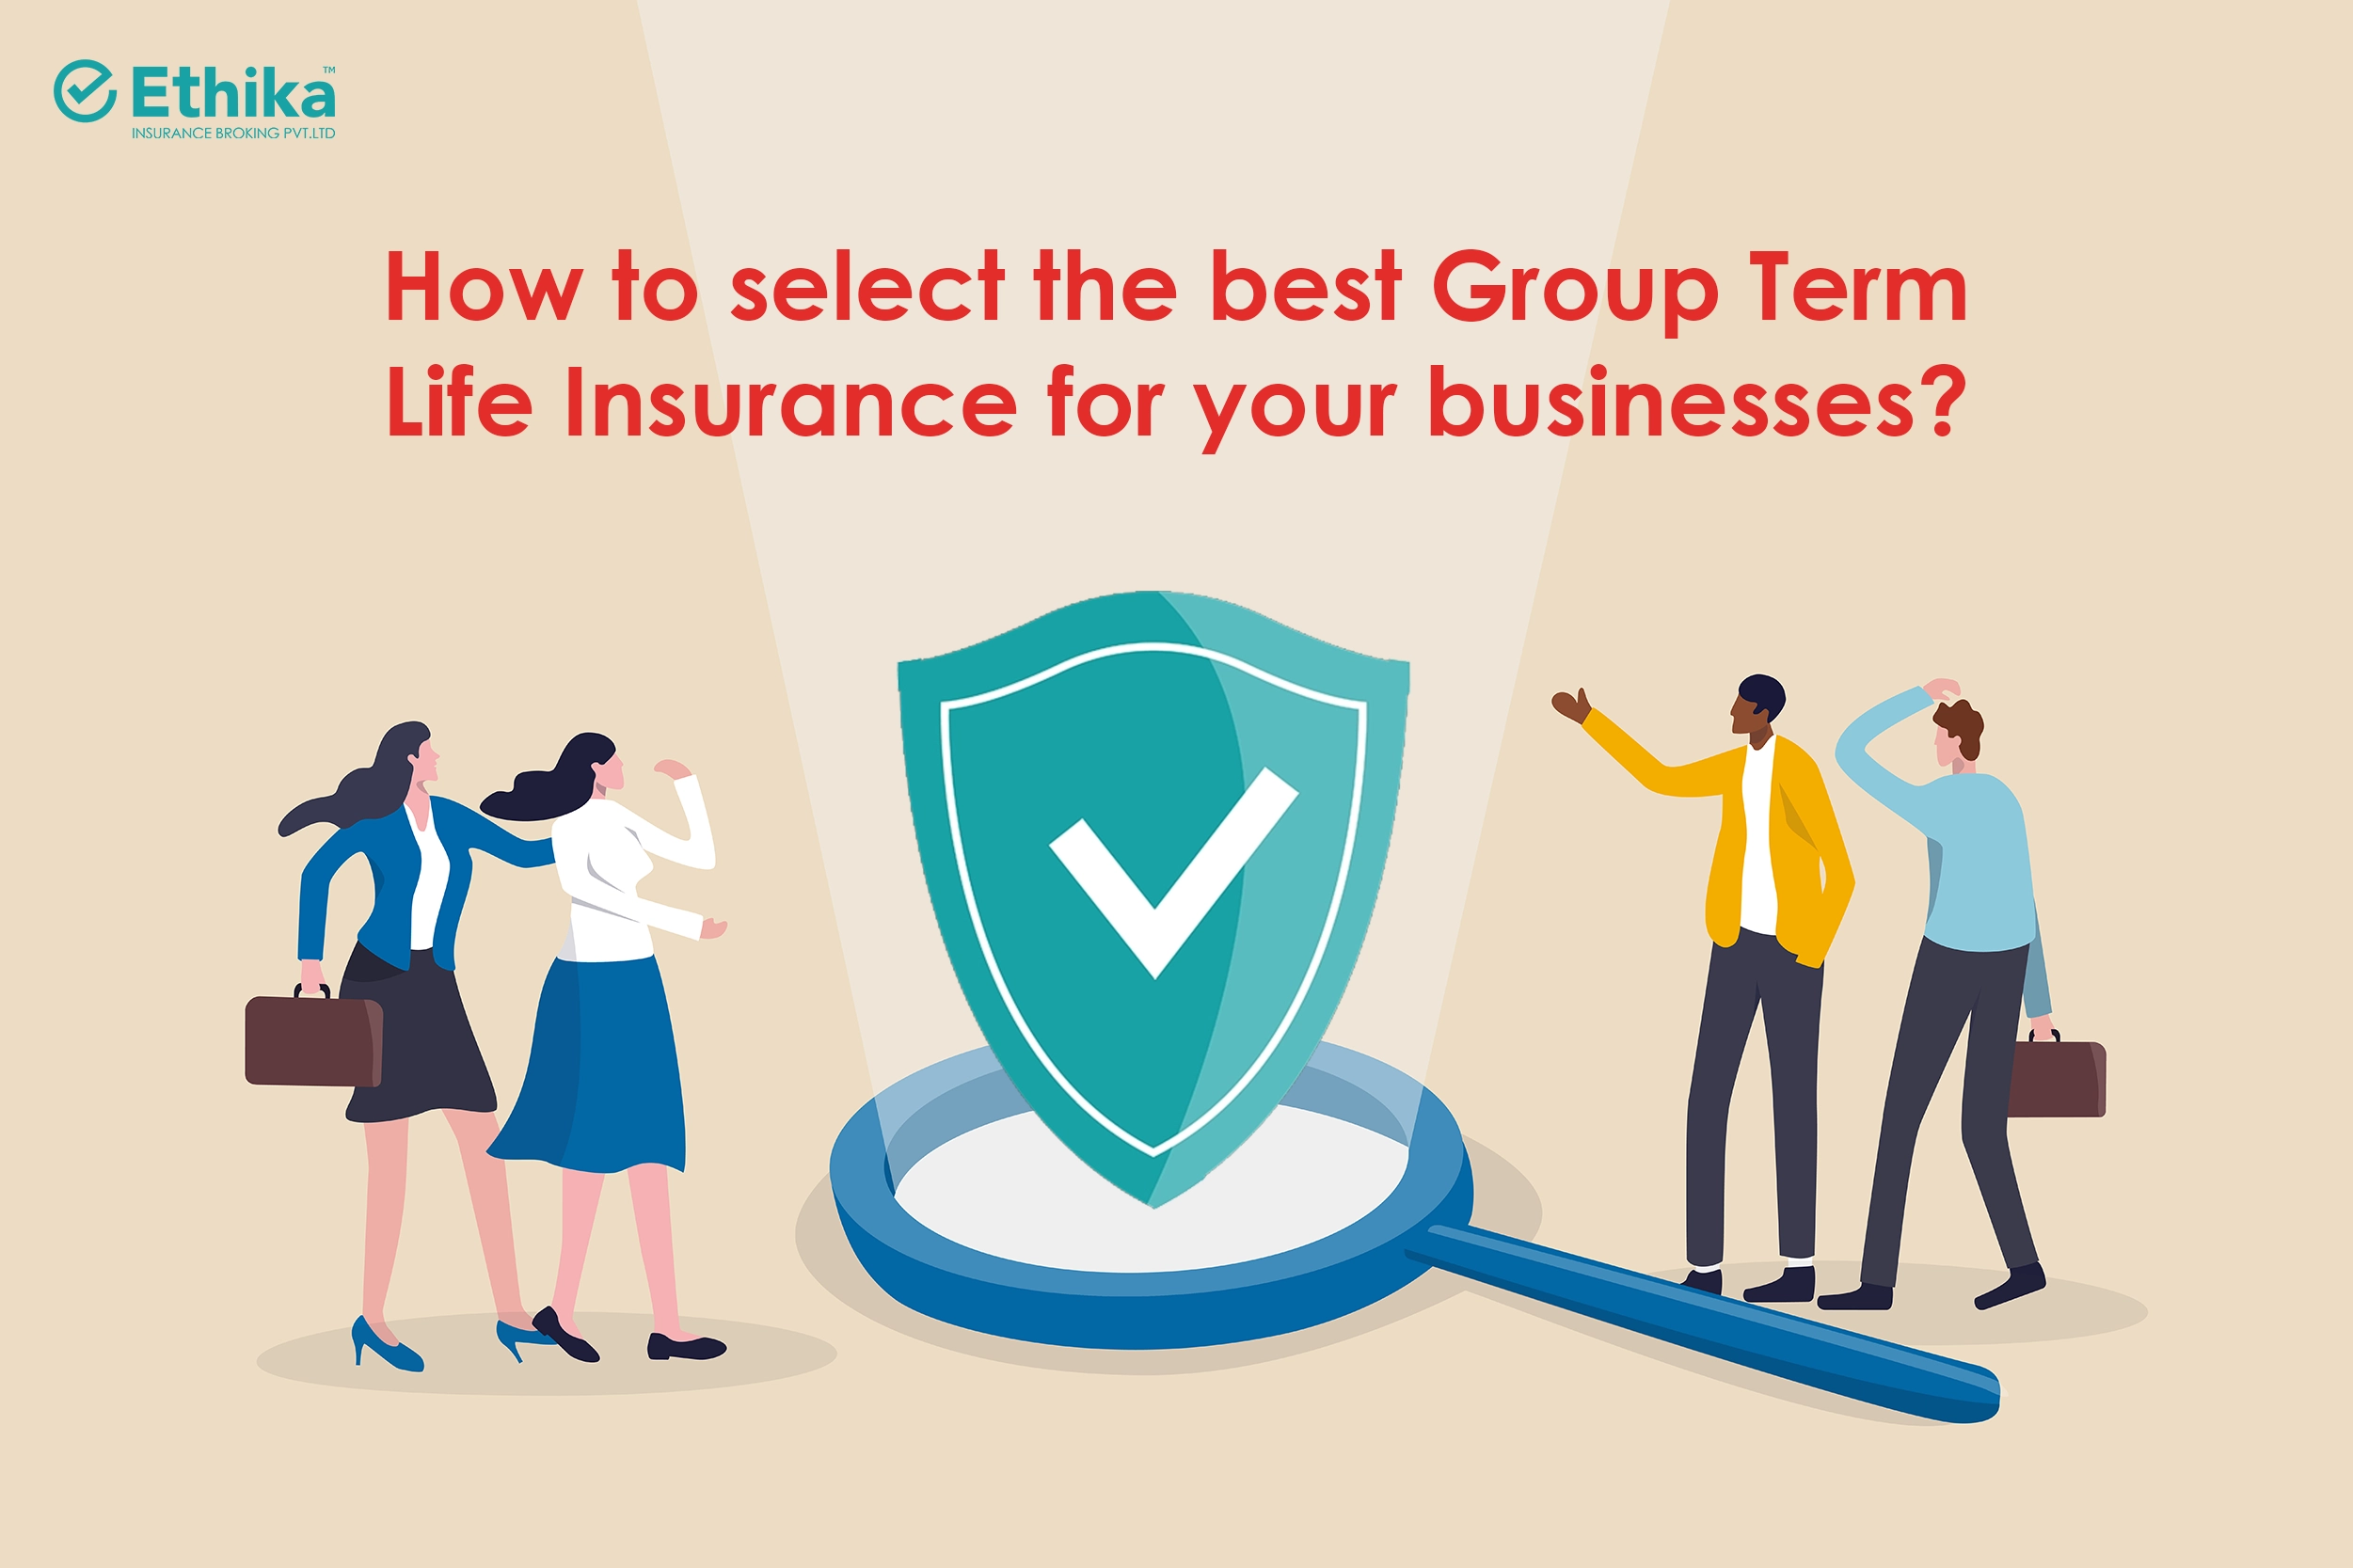 How to select the best Group Term Life Insurance for your businesses